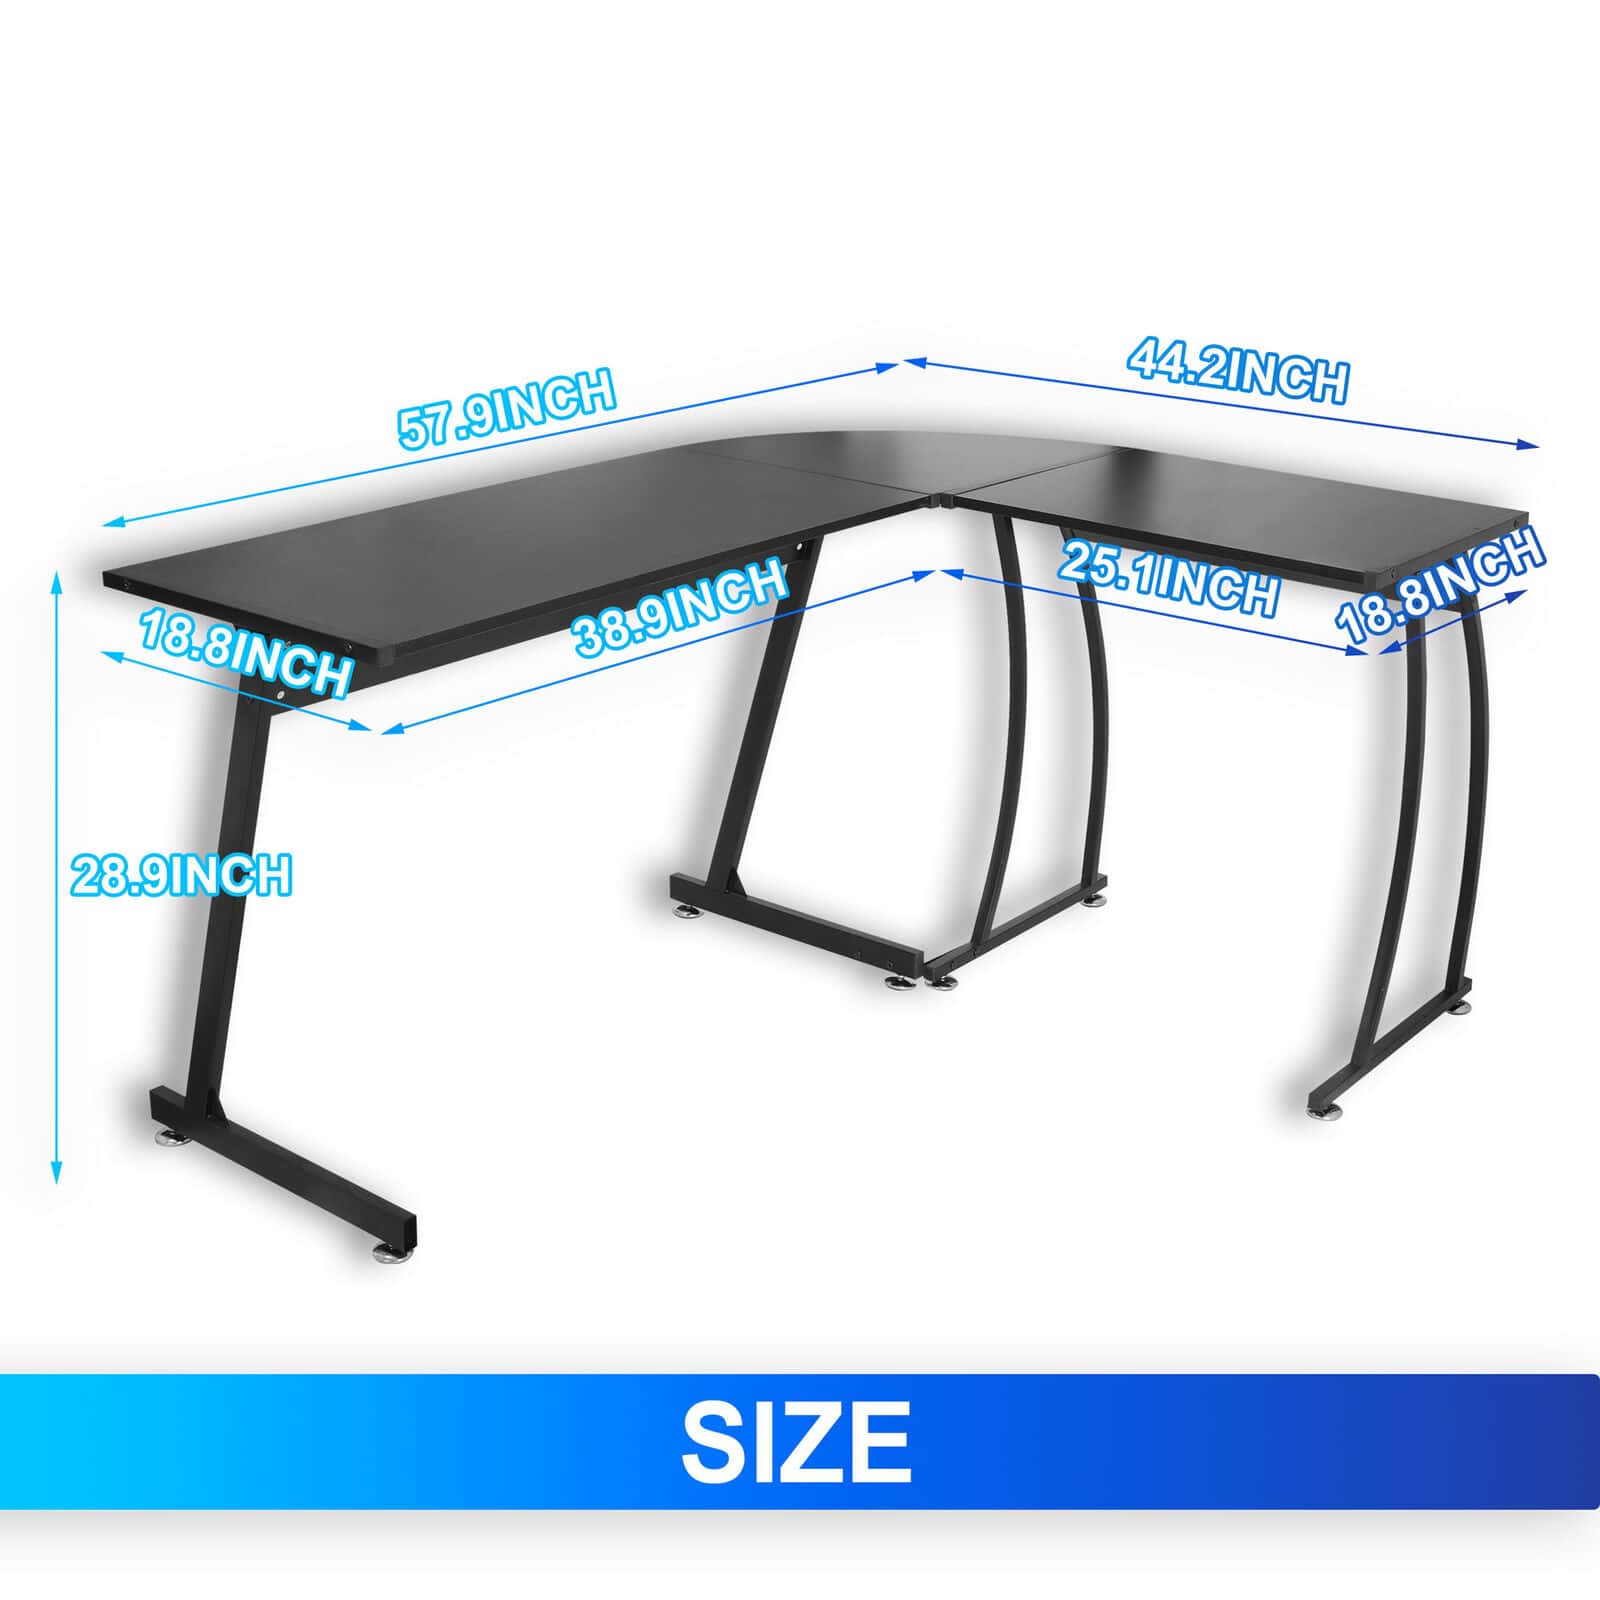 58″ Computer Gaming Laptop Table L Shaped Desk Workstation Home Office Desk with dimensions displayed, including a main table length of 57.9 inches and a side table length of 44.2 inches.